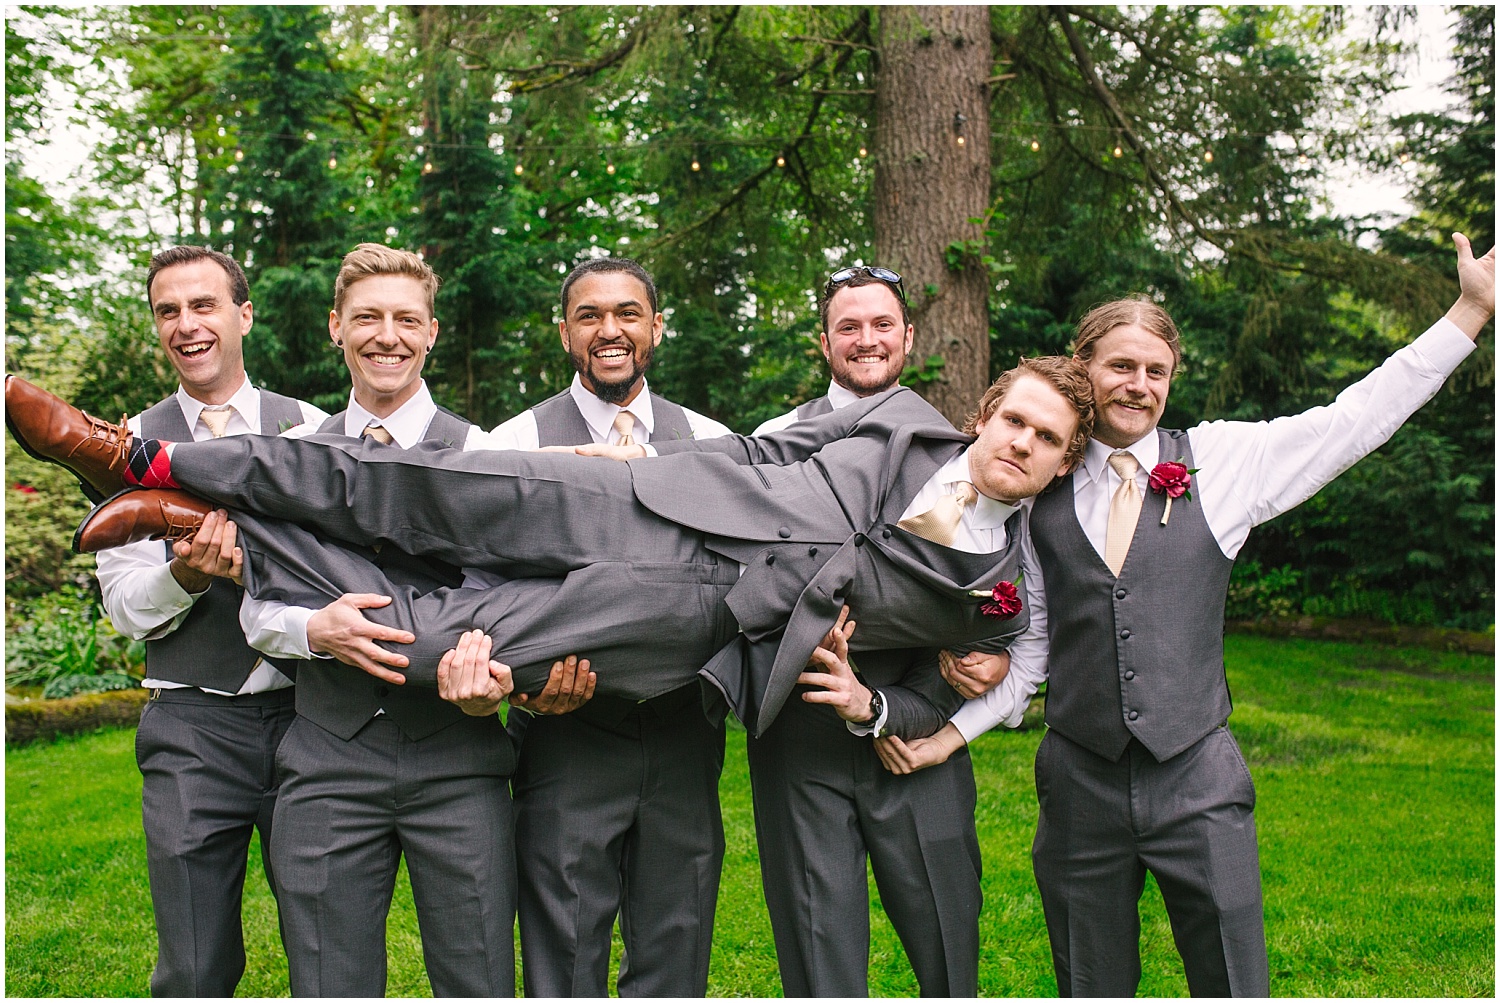 Bridal party pictures at Black Diamond Gardens wedding